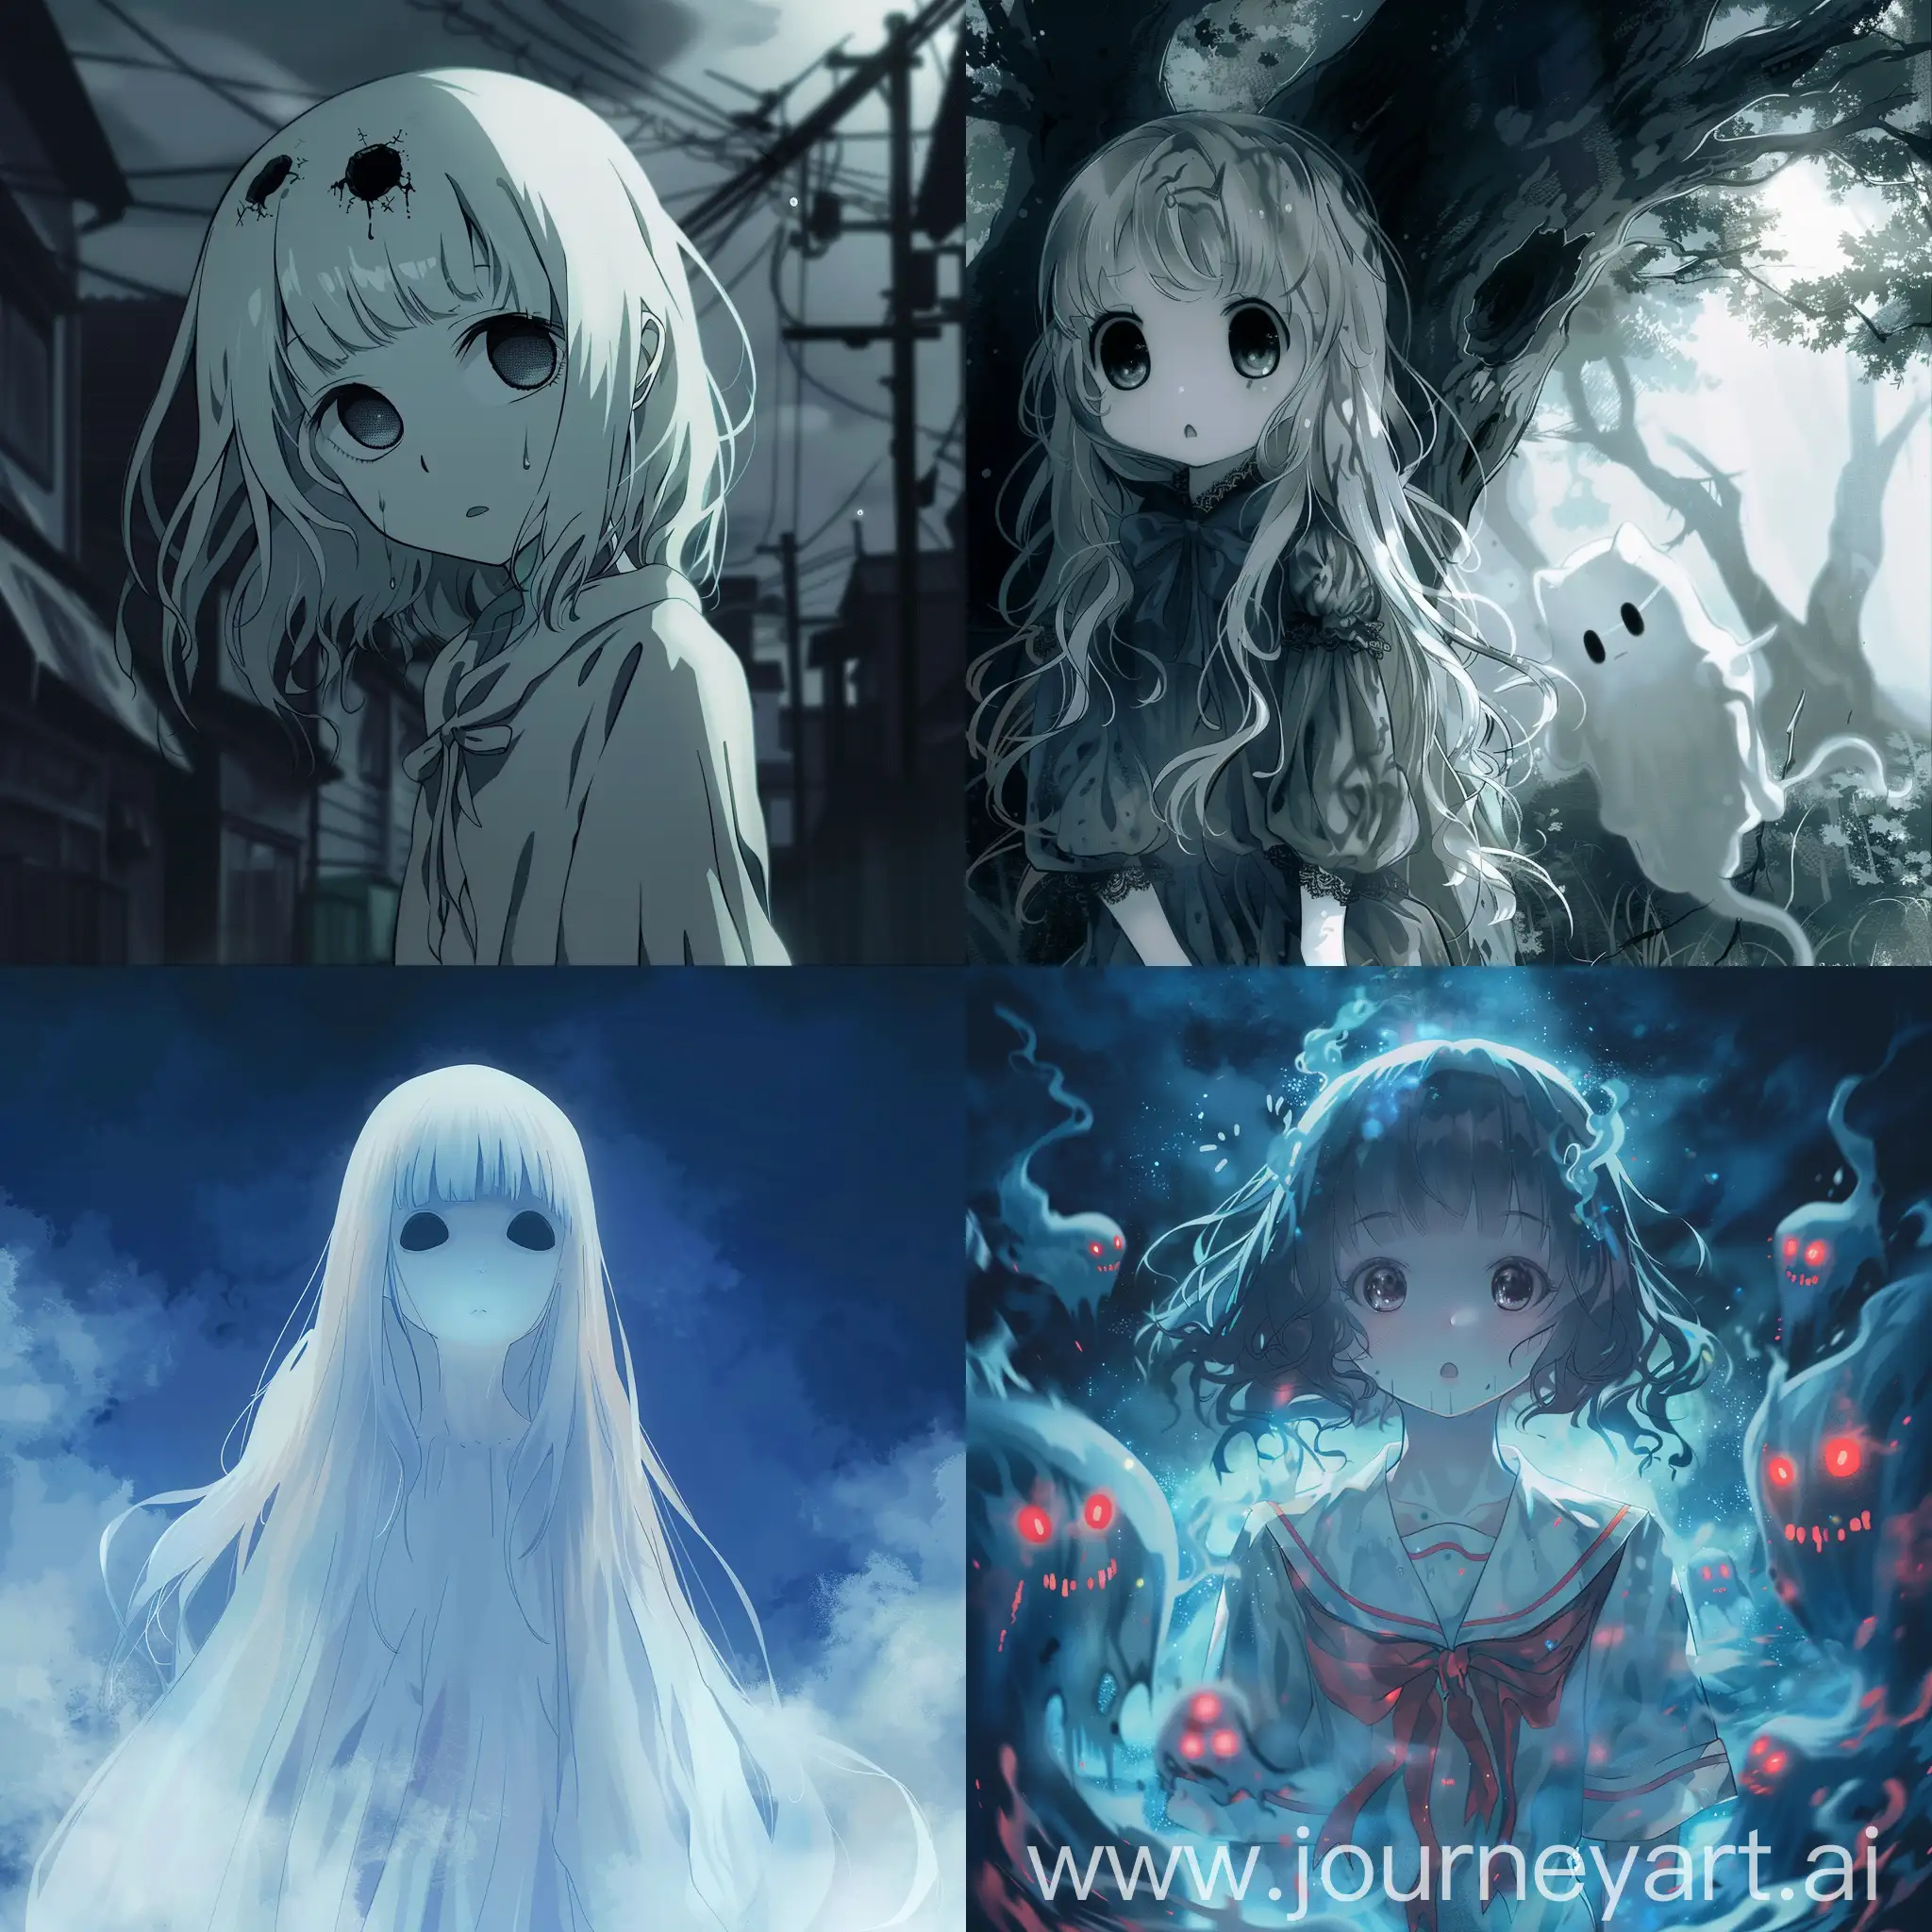 Ethereal-Anime-Ghost-Girl-in-Enigmatic-Ambiance